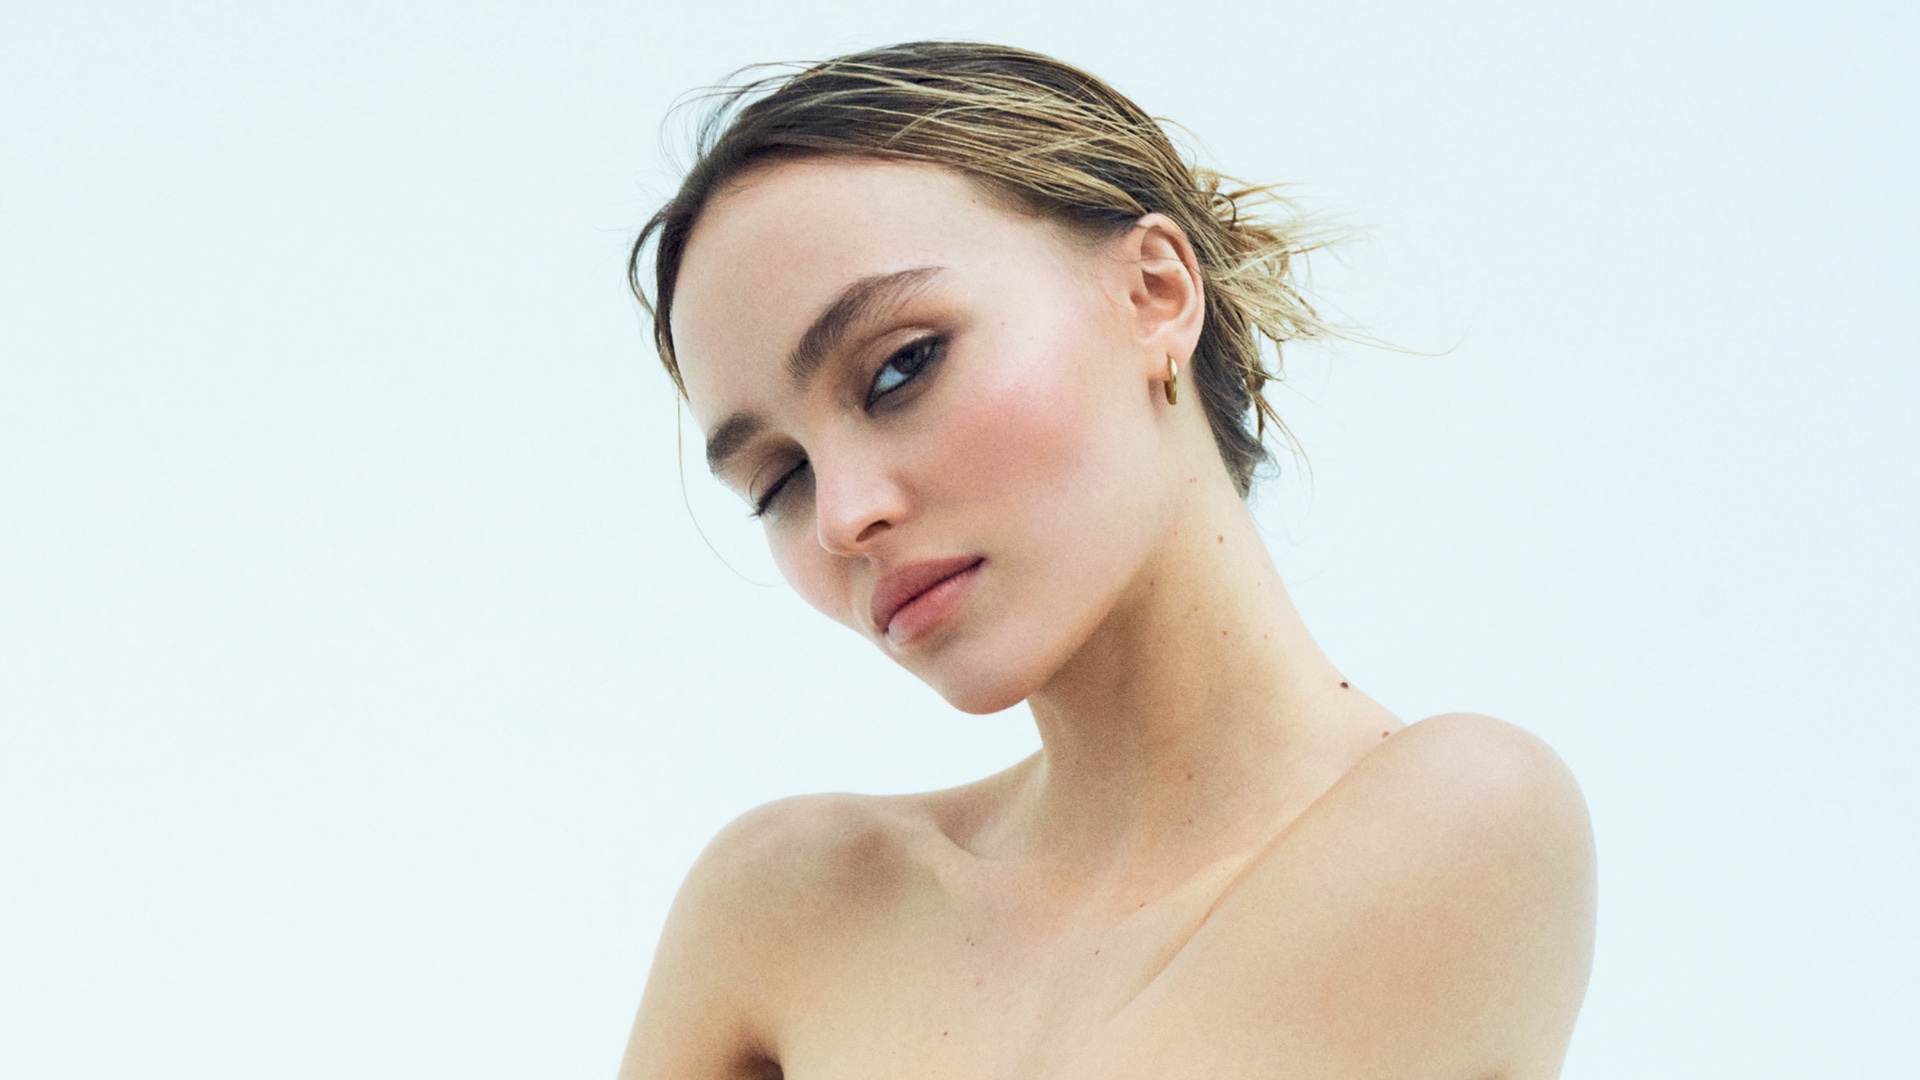 See Lily-Rose Depp Make Her Debut as a Chanel Model